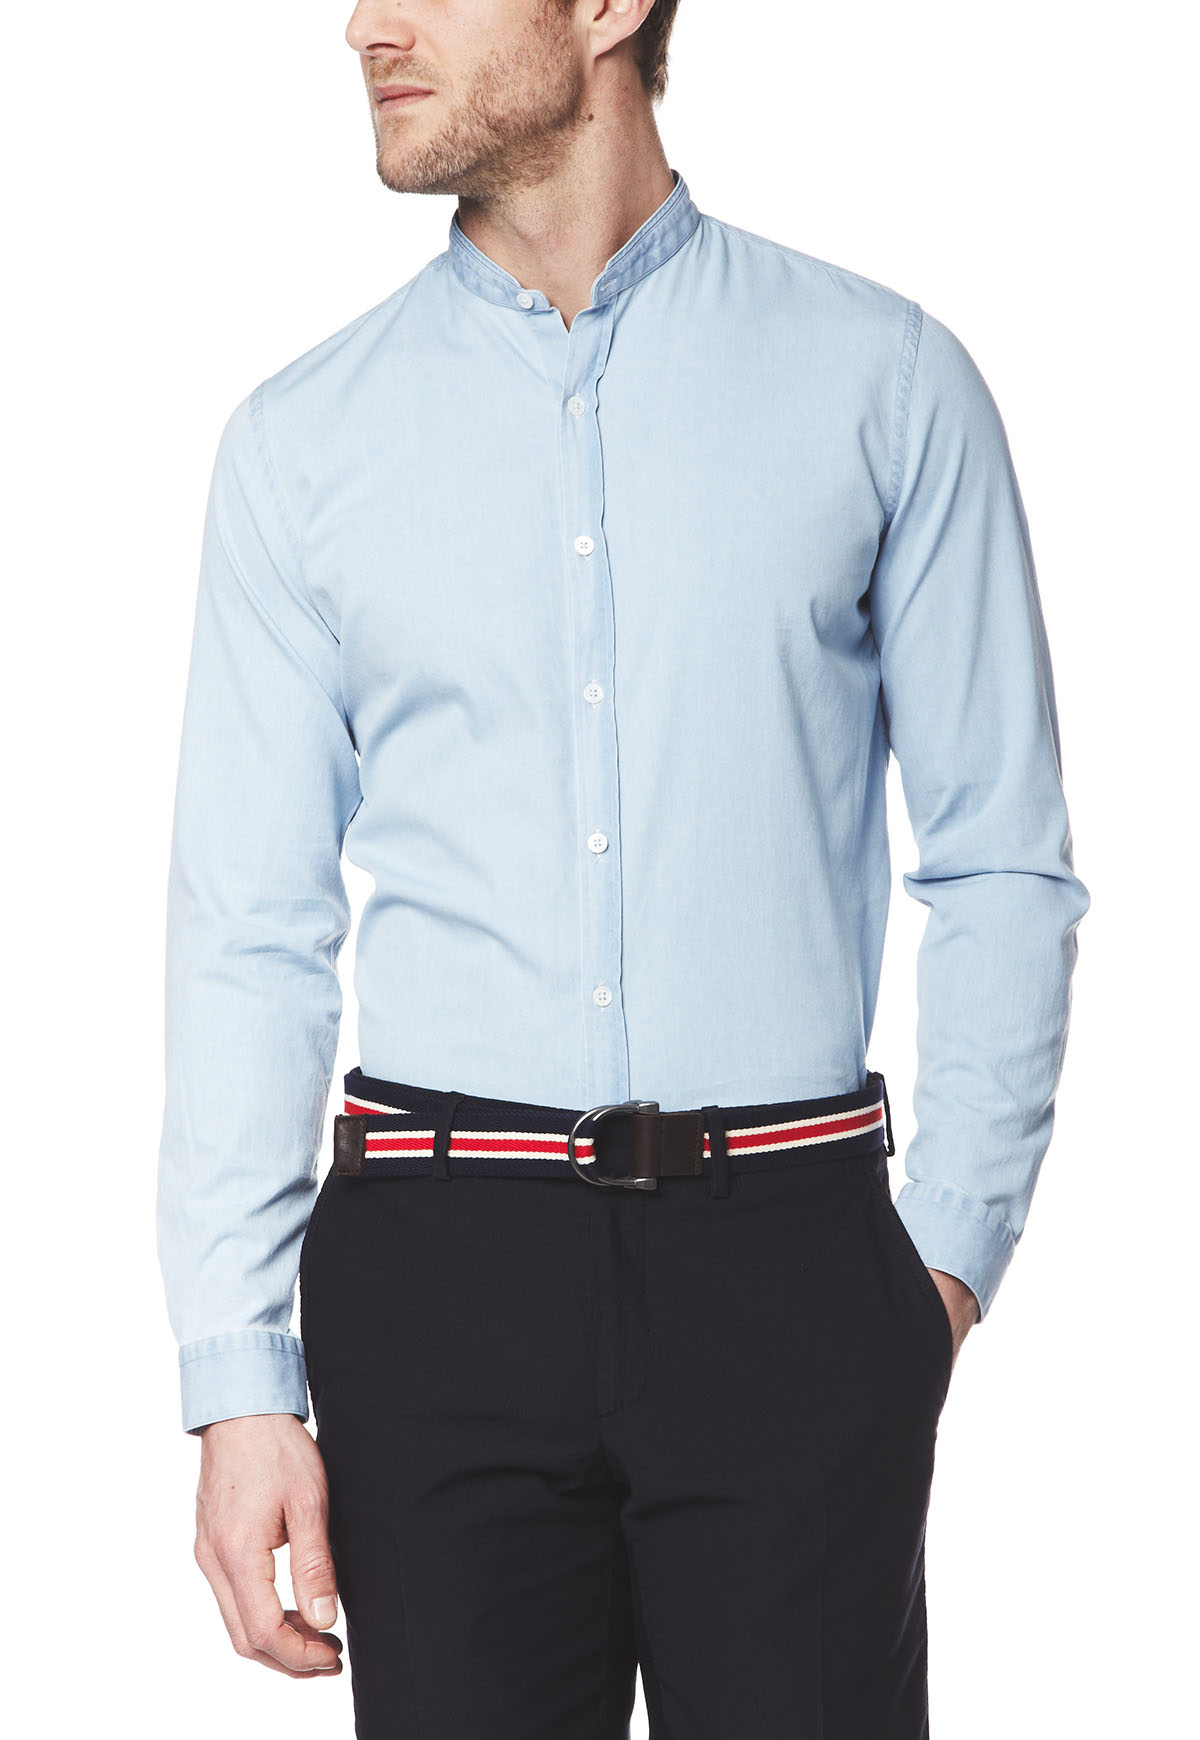 chemise-homme-manches-longues-coupe-extra-ajustee-anatole-twill-bleu-clair-uni-coton-face-alain-figaret-an0520606935.jpg